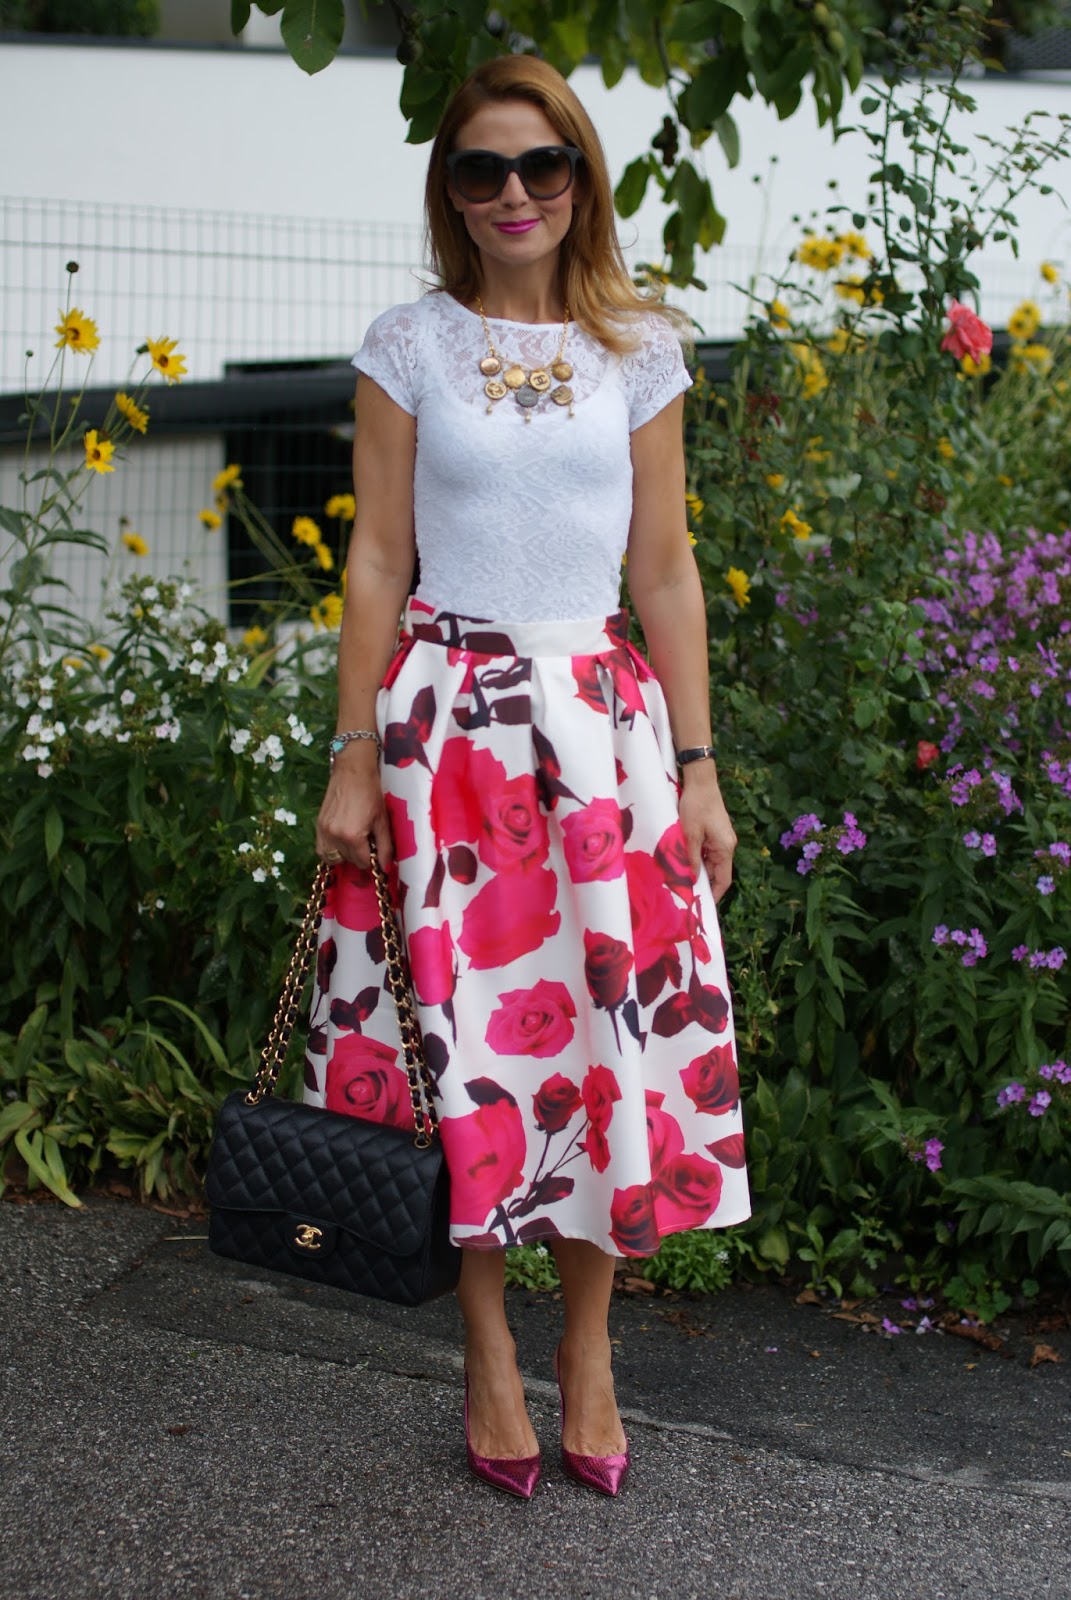 Rose print midi skirt and Chanel bag: romantic outfit | Fashion and ...